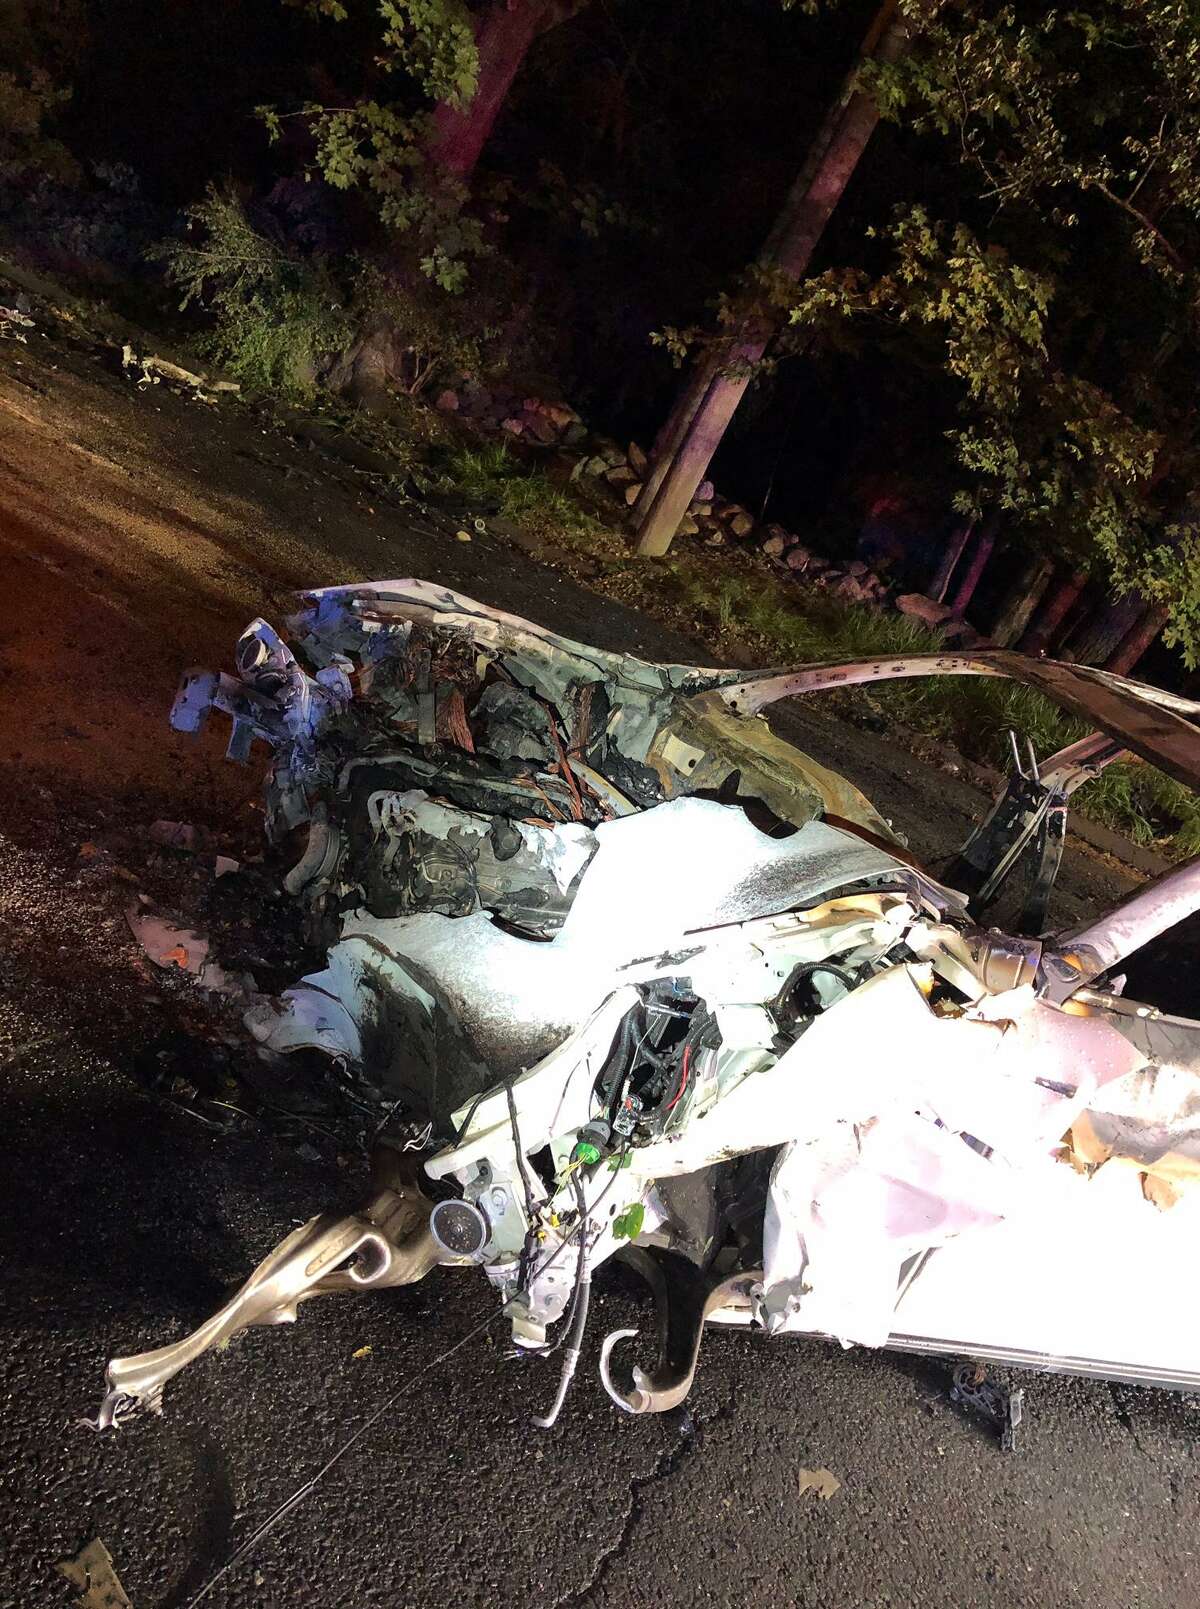 This 2016 Maserati Ghibli crashed Monday night on Westhill Road and burst into flames. The 22-year-old driver was taken to the Bridgeport Hospital Burn Unit and is in critical condition.